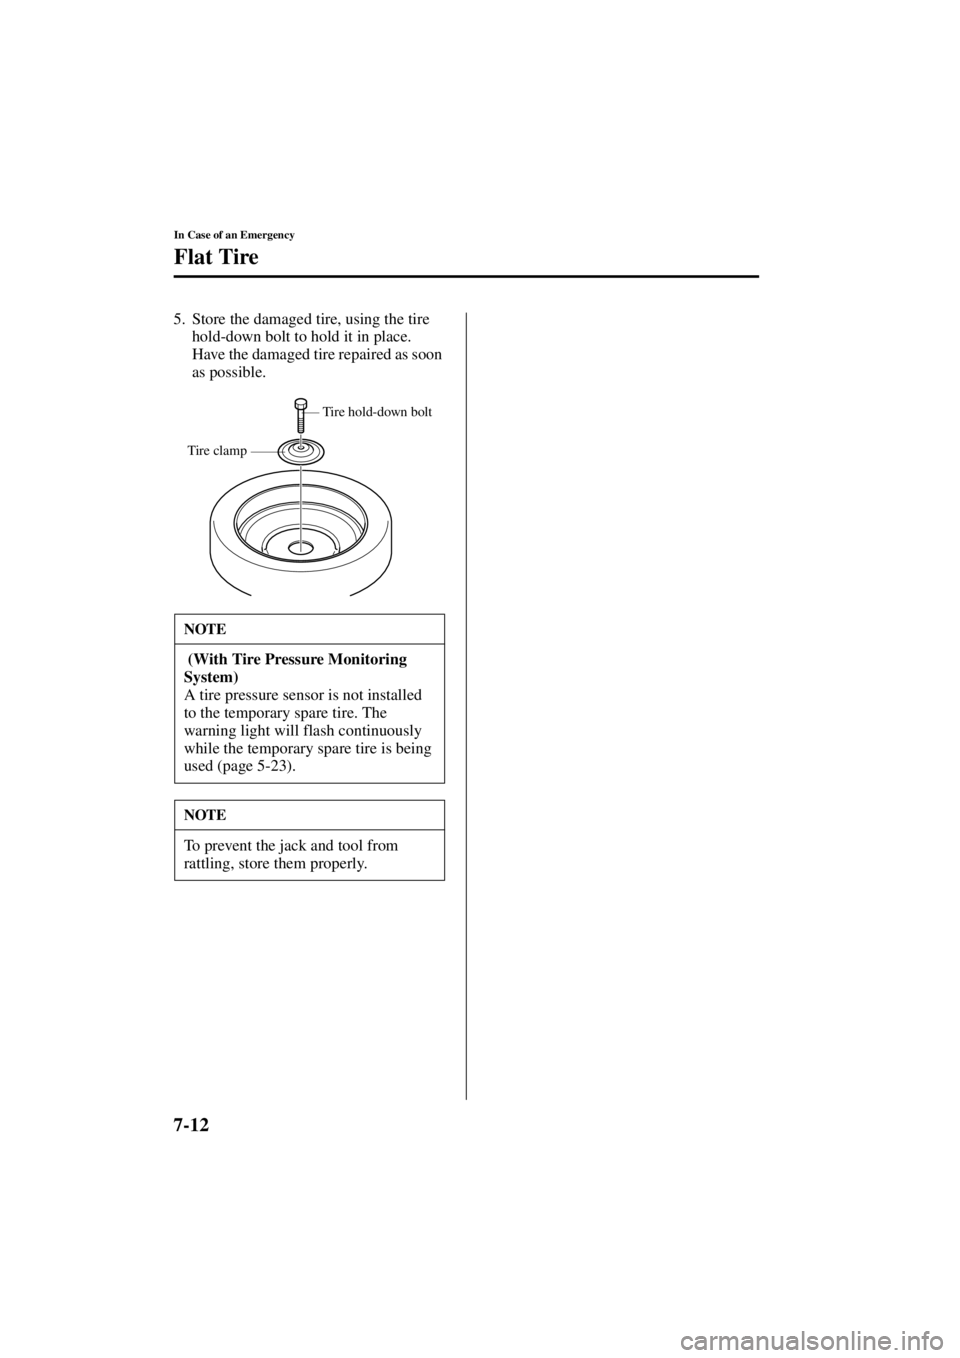 MAZDA MODEL 3 5-DOOR 2004 User Guide 7-12
In Case of an Emergency
Flat Tire
Form No. 8S18-EA-03I
5. Store the damaged tire, using the tire hold-down bolt to hold it in place. 
Have the damaged tire repaired as soon 
as possible.
NOTE
 (W